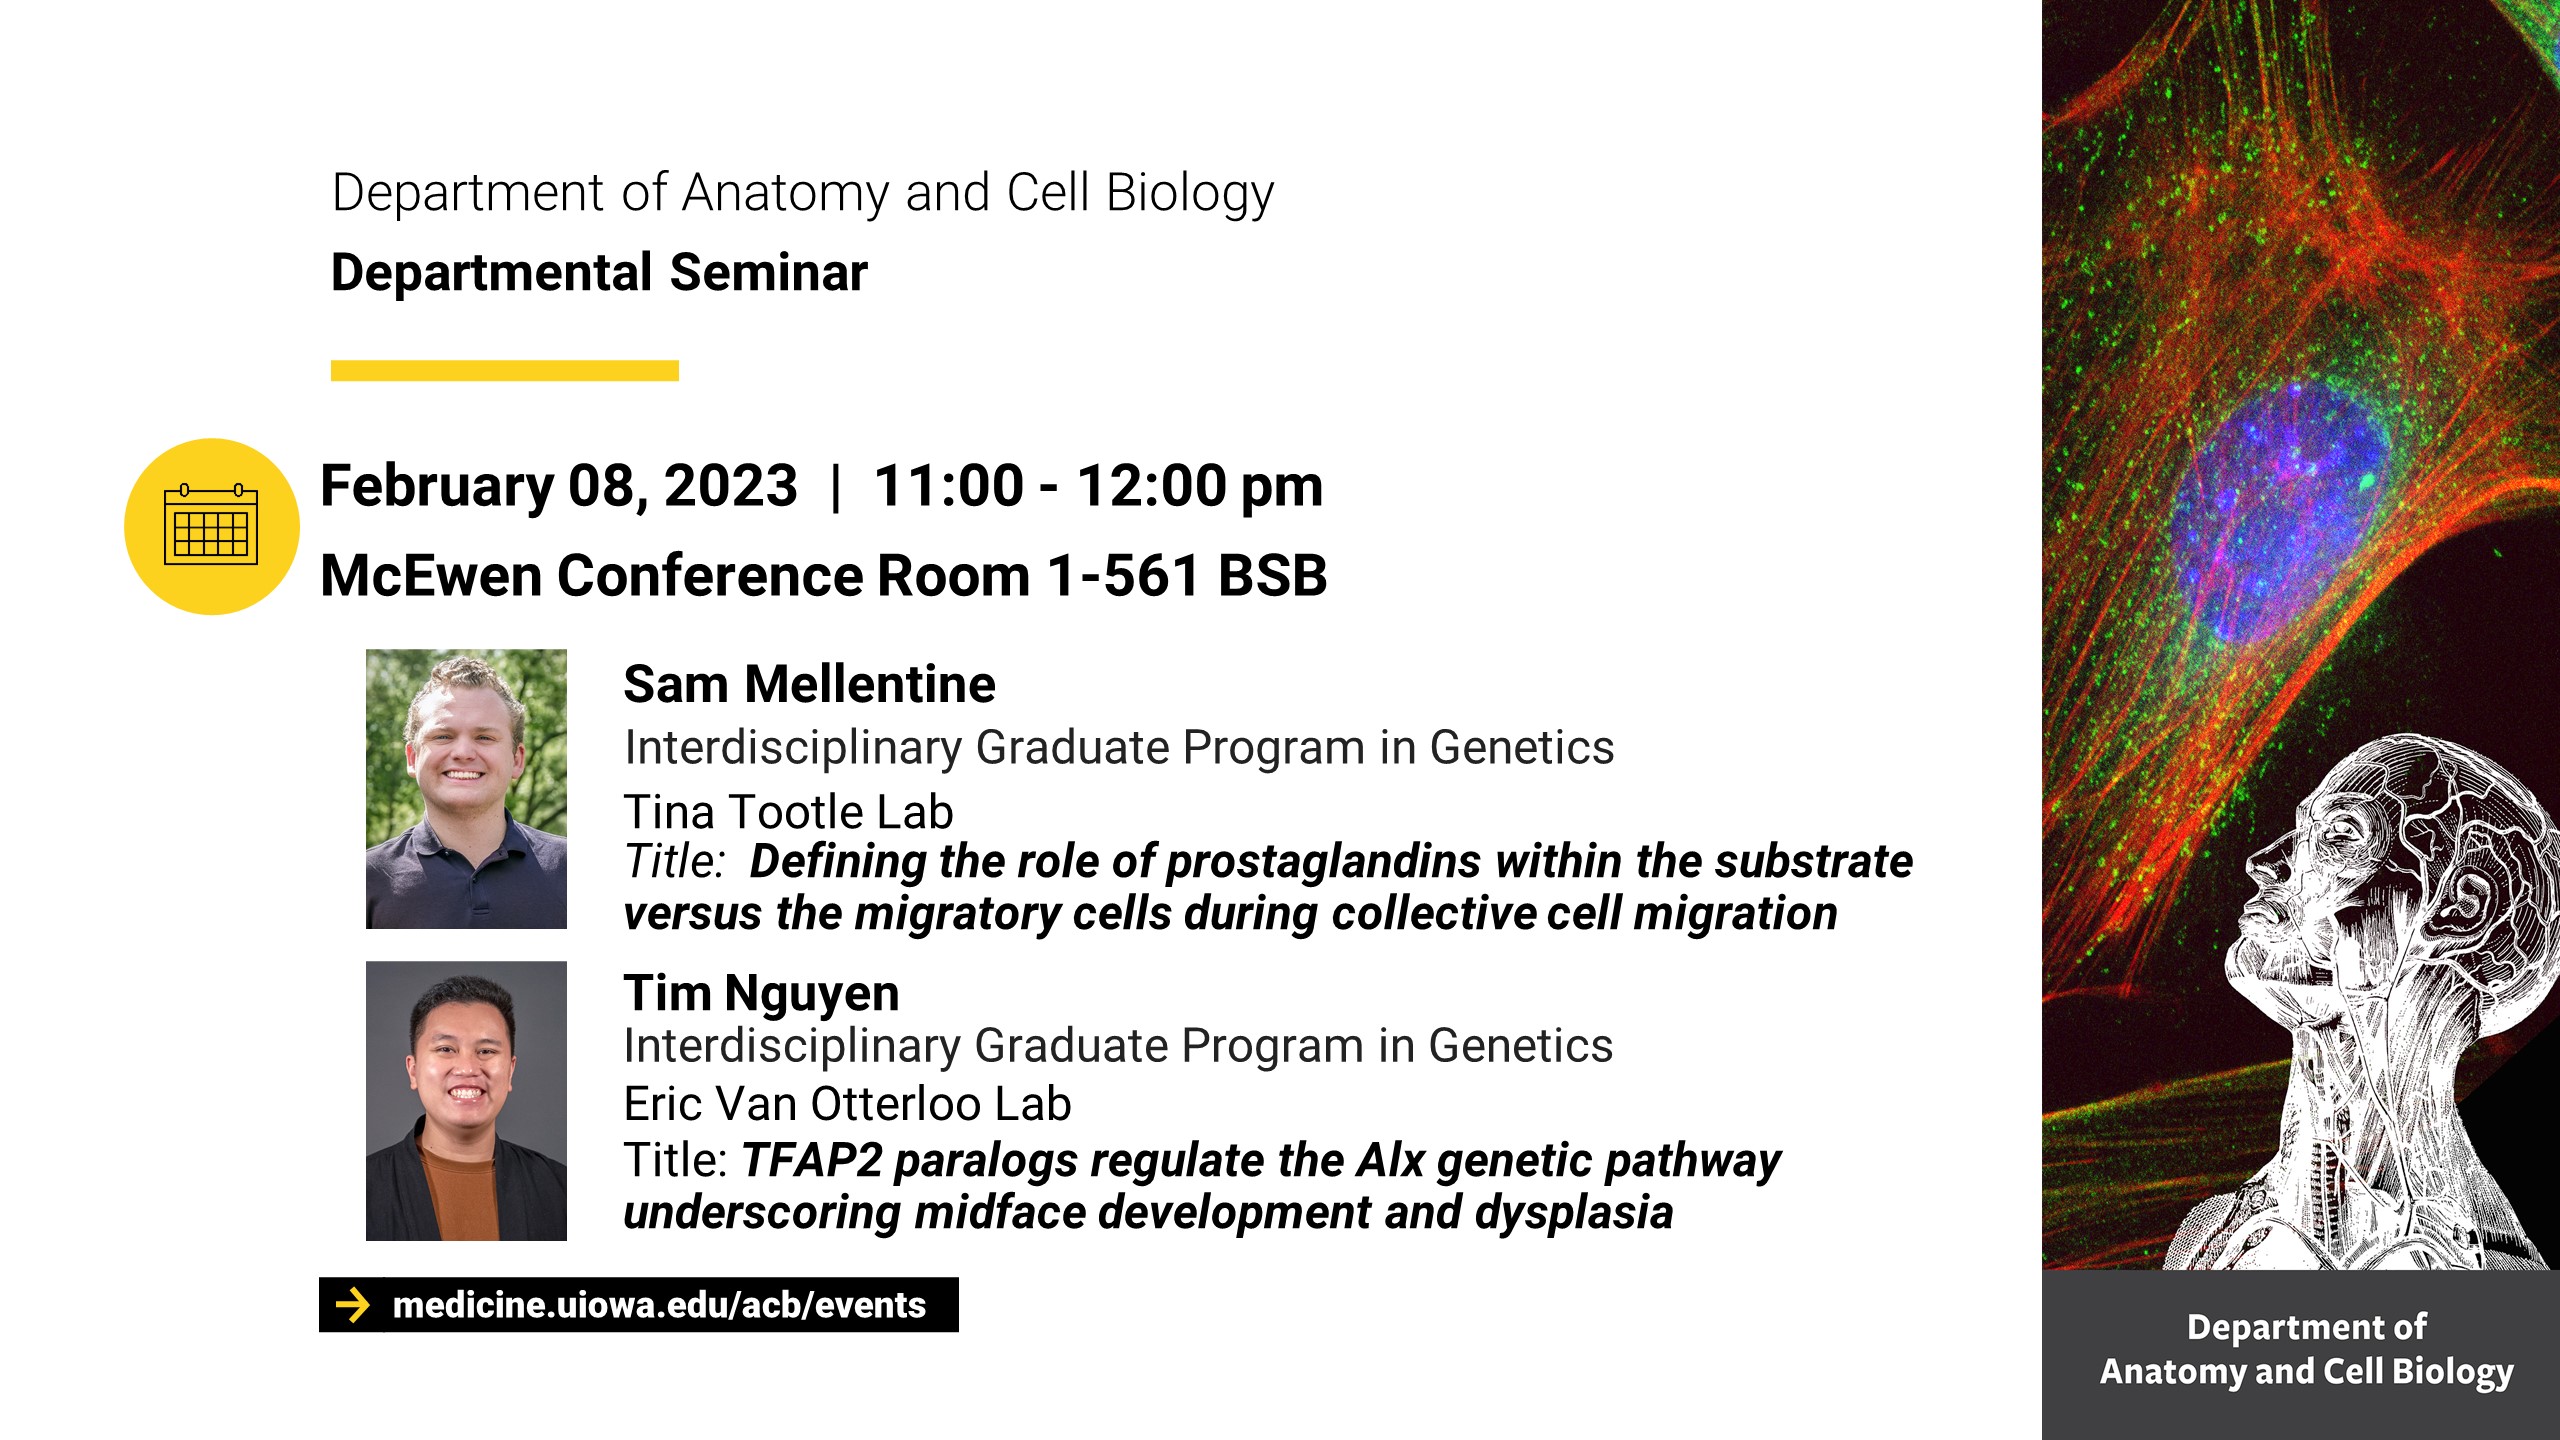 Department of Anatomy and Cell Biology Seminar Series